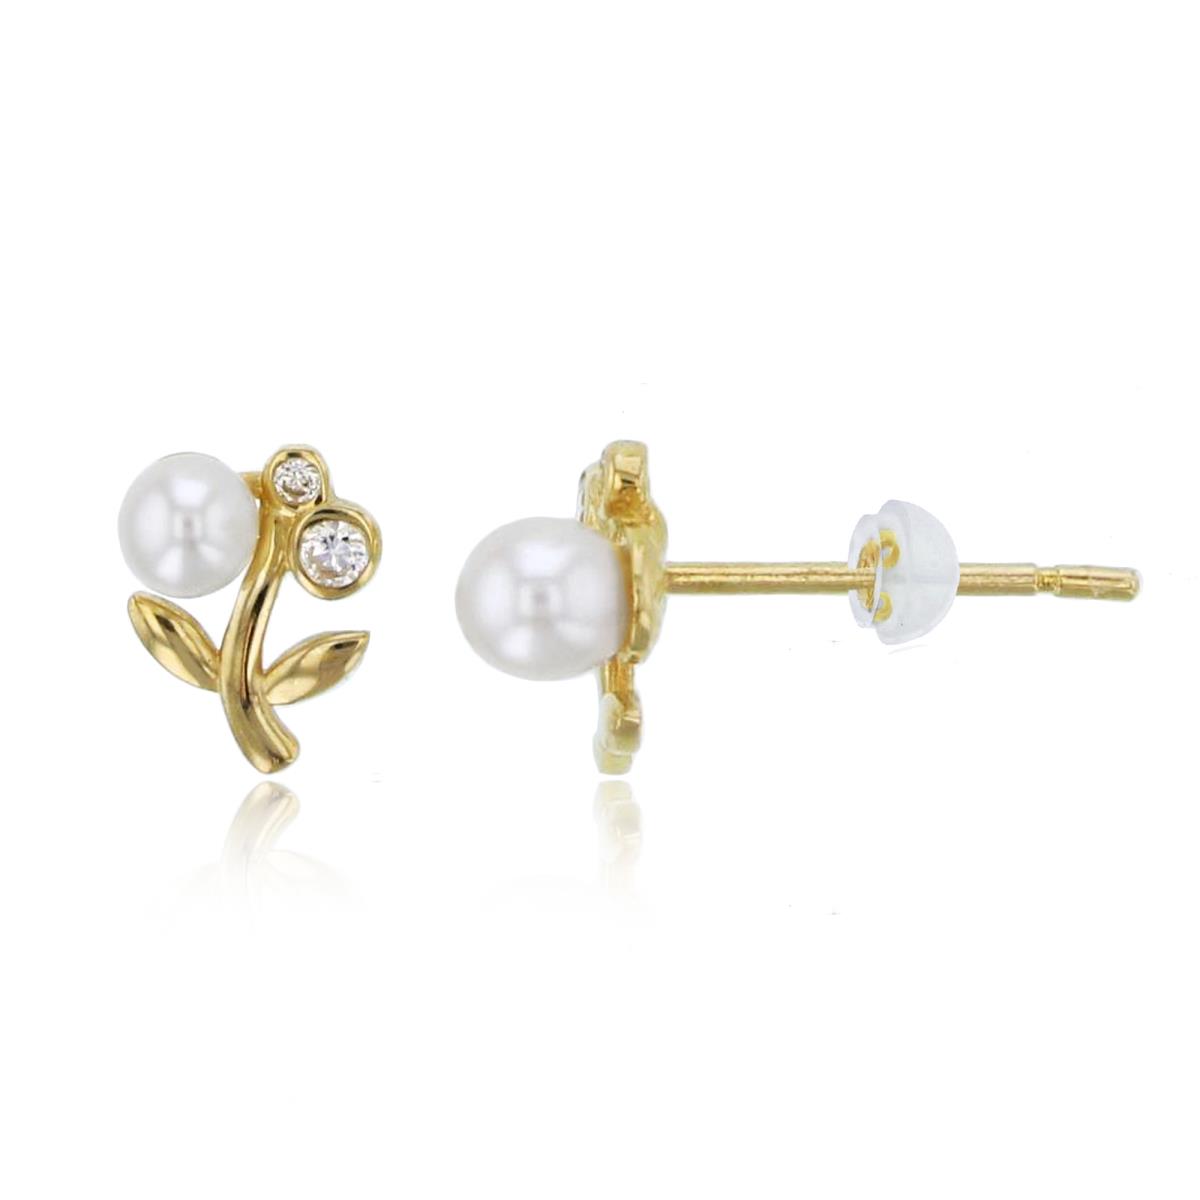 10K Yellow Gold Rnd CZ & Fresh Water Pearl Cherry Studs with Silicon Backs